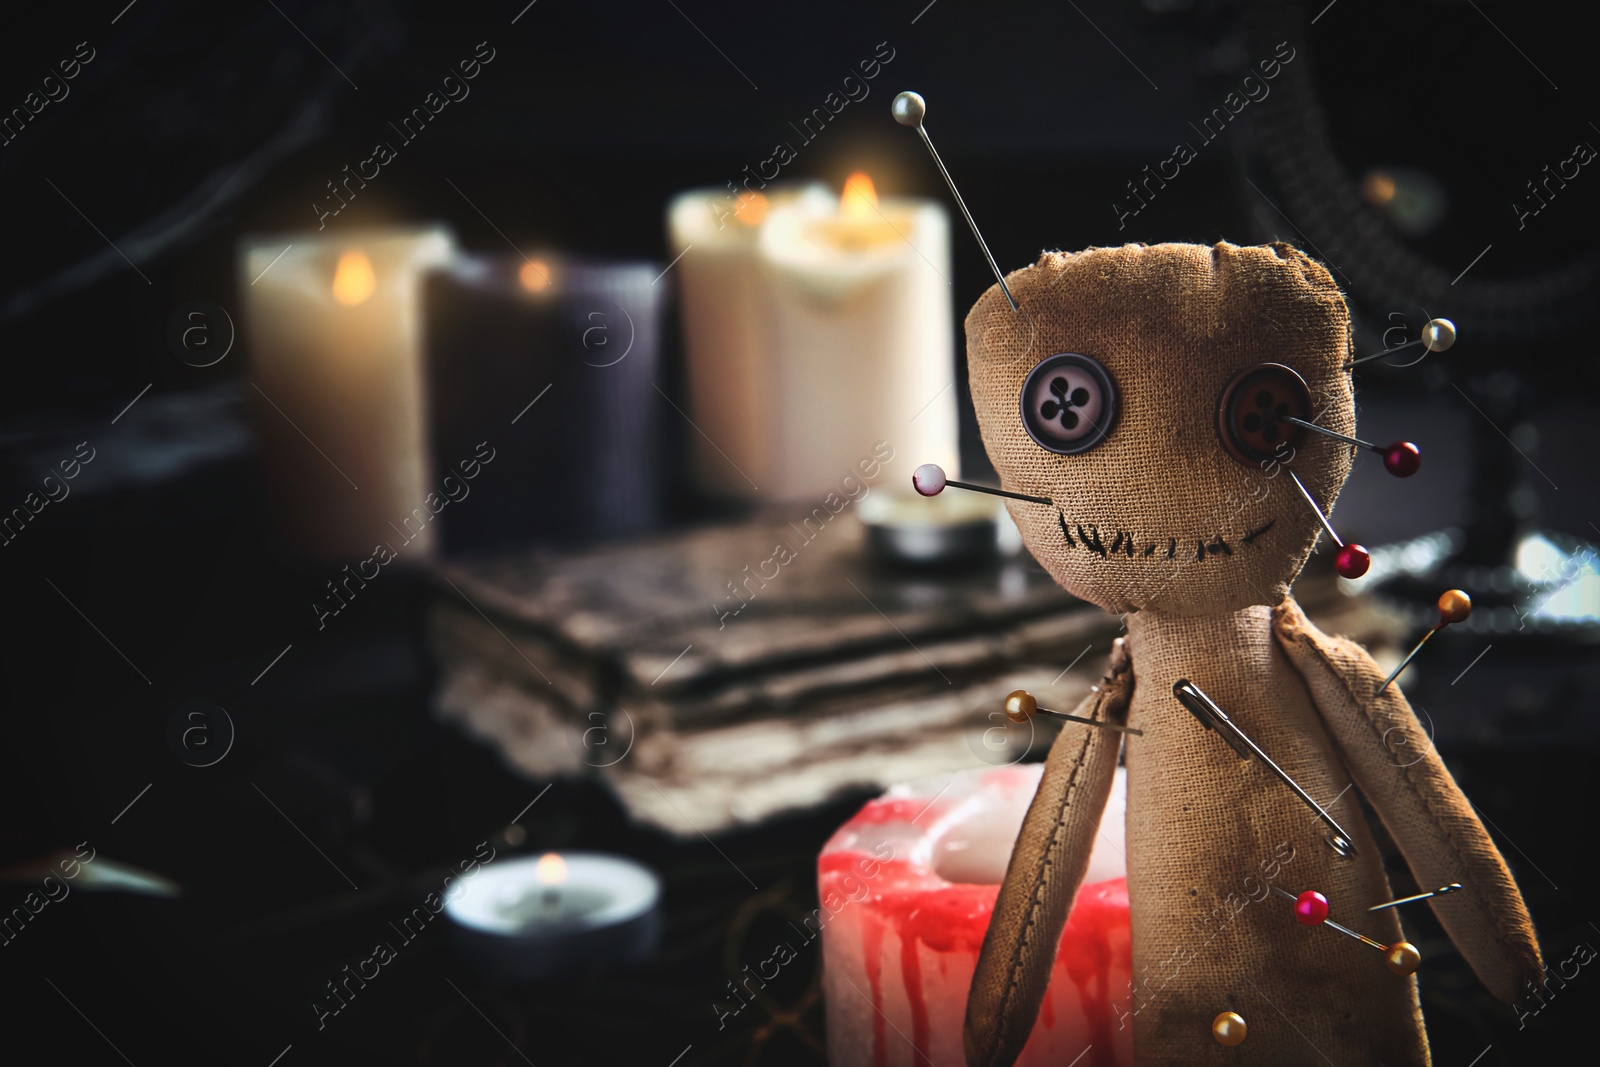 Image of Voodoo doll pierced with pins on table indoors, closeup